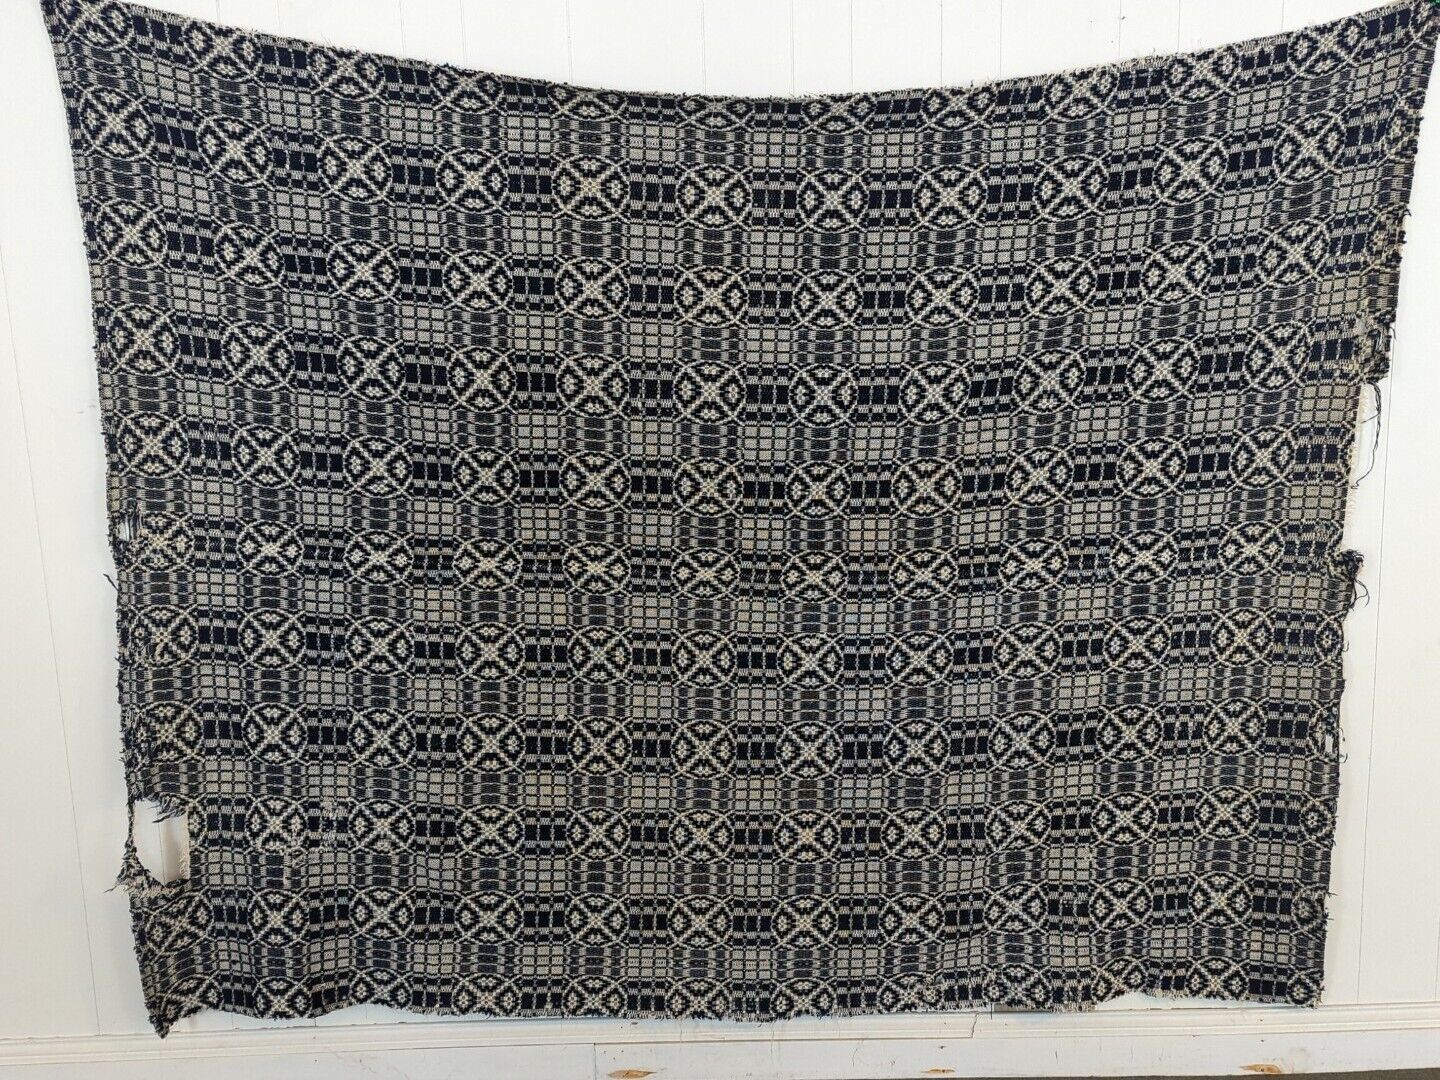 Antique Early American Colonial Hand Woven Coverlet Indigo & White 